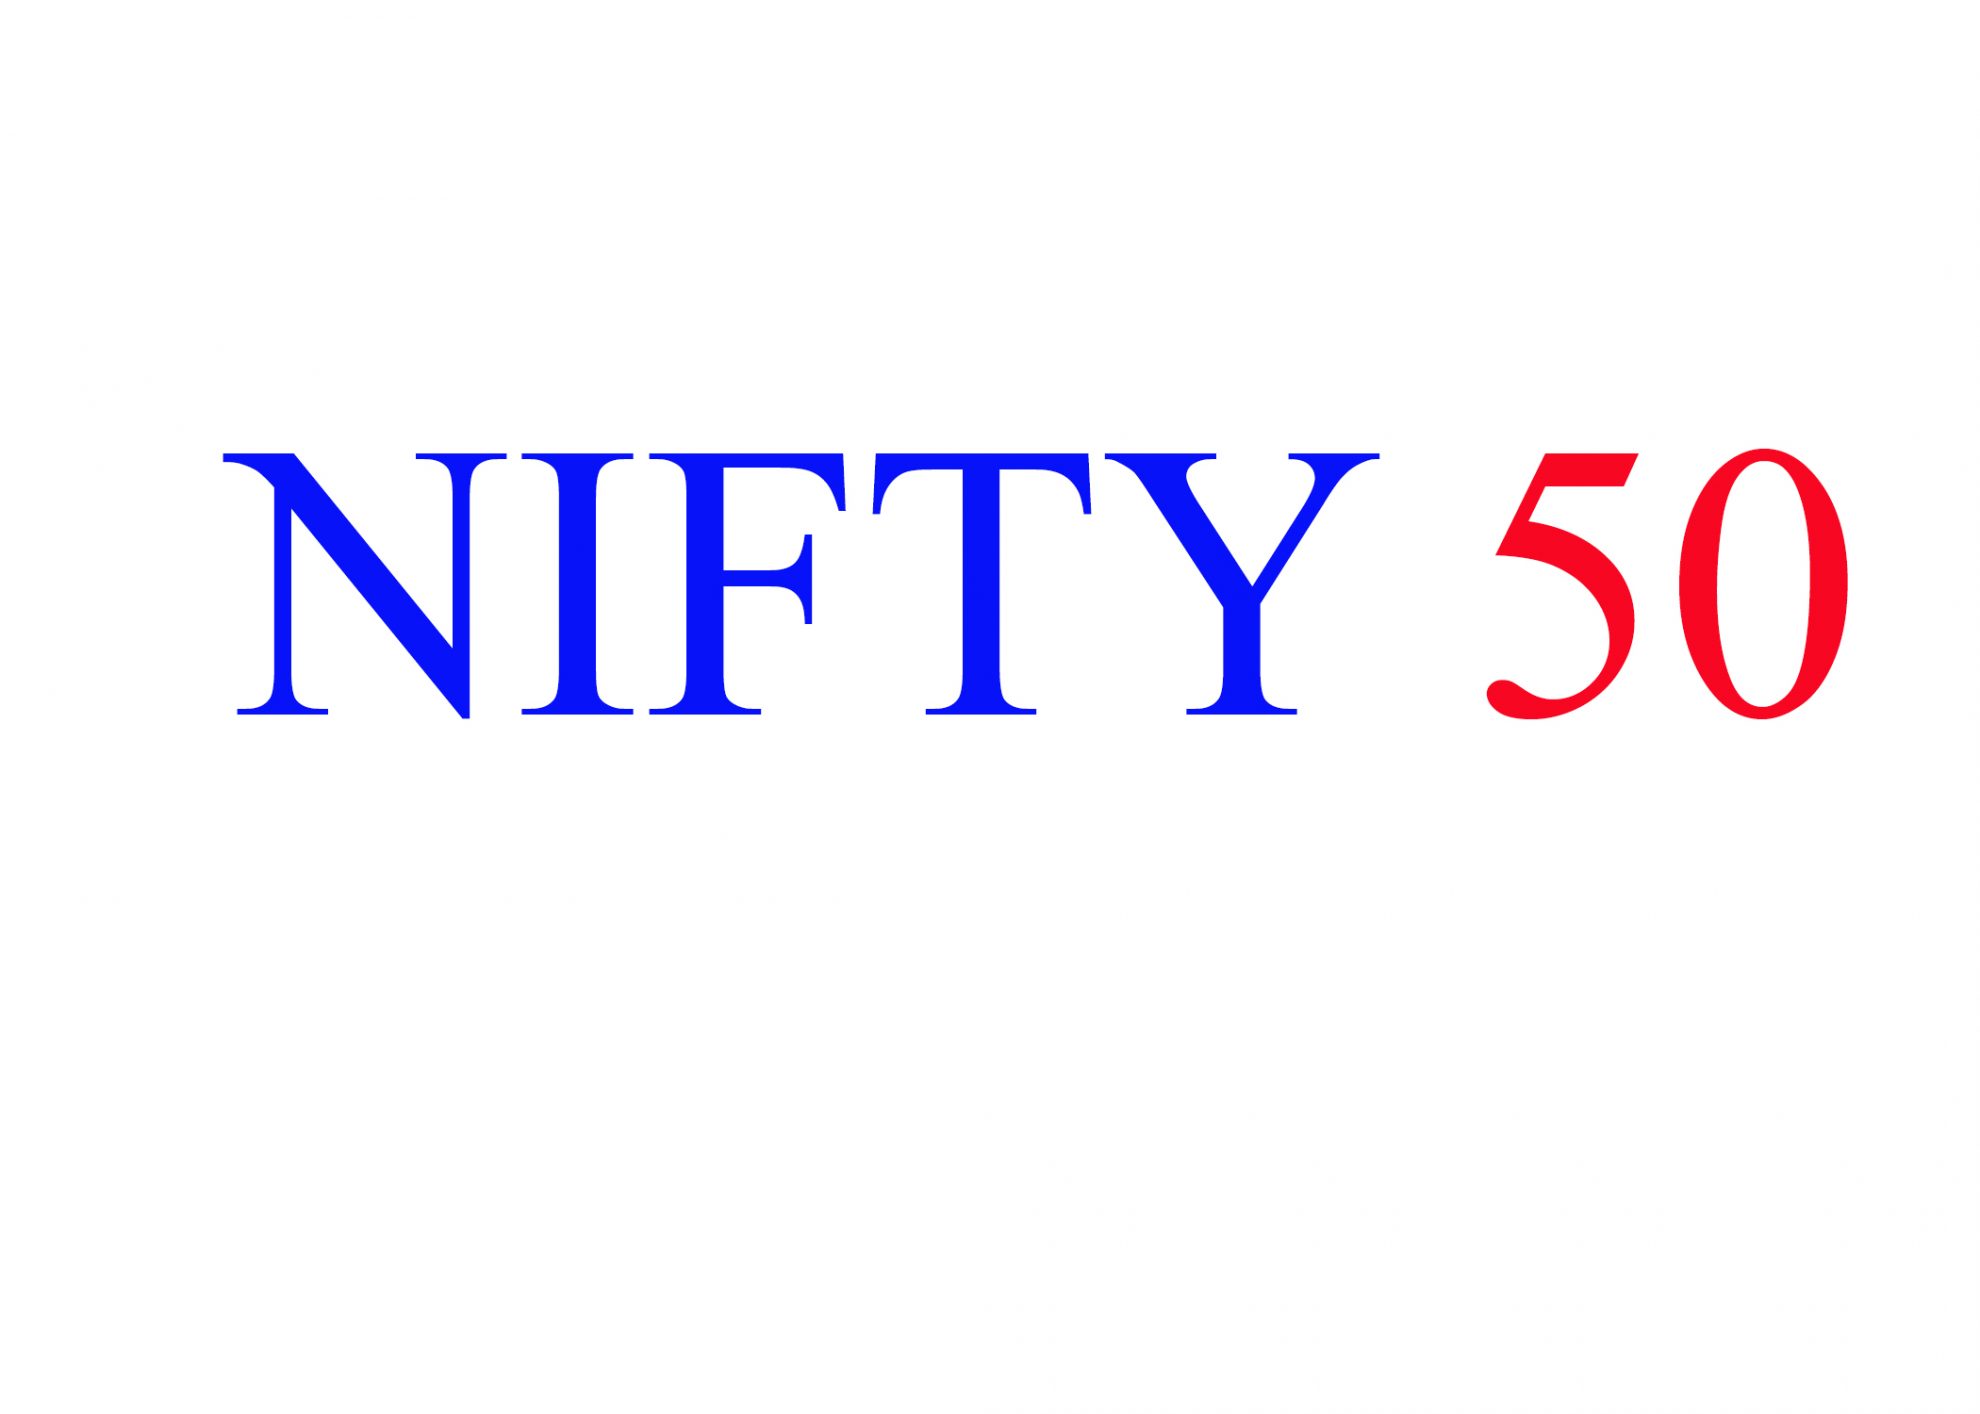 nifty 50 index